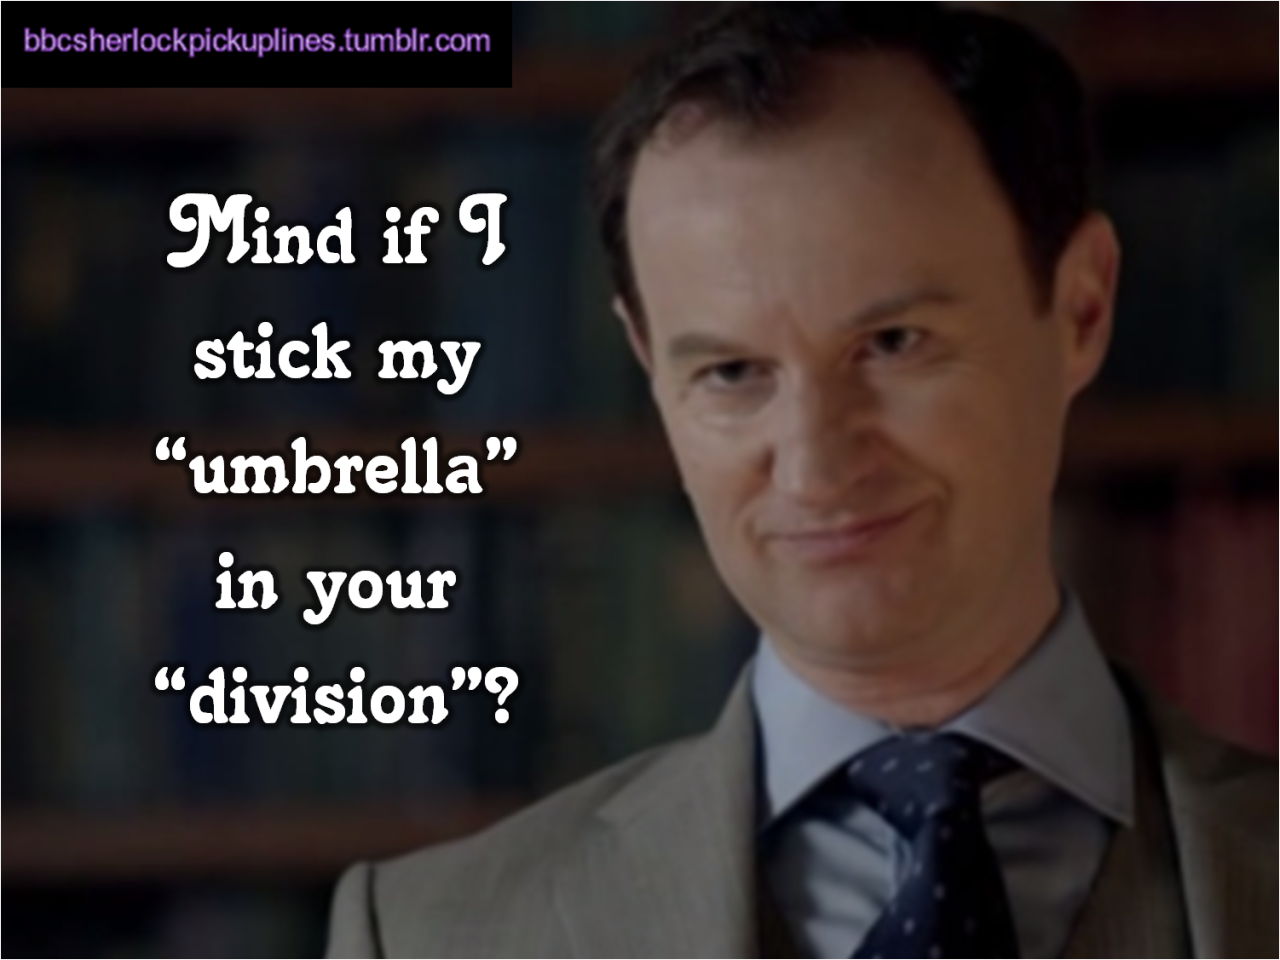 The best of Greg&rsquo;s division, from BBC Sherlock Pick-Up Lines.